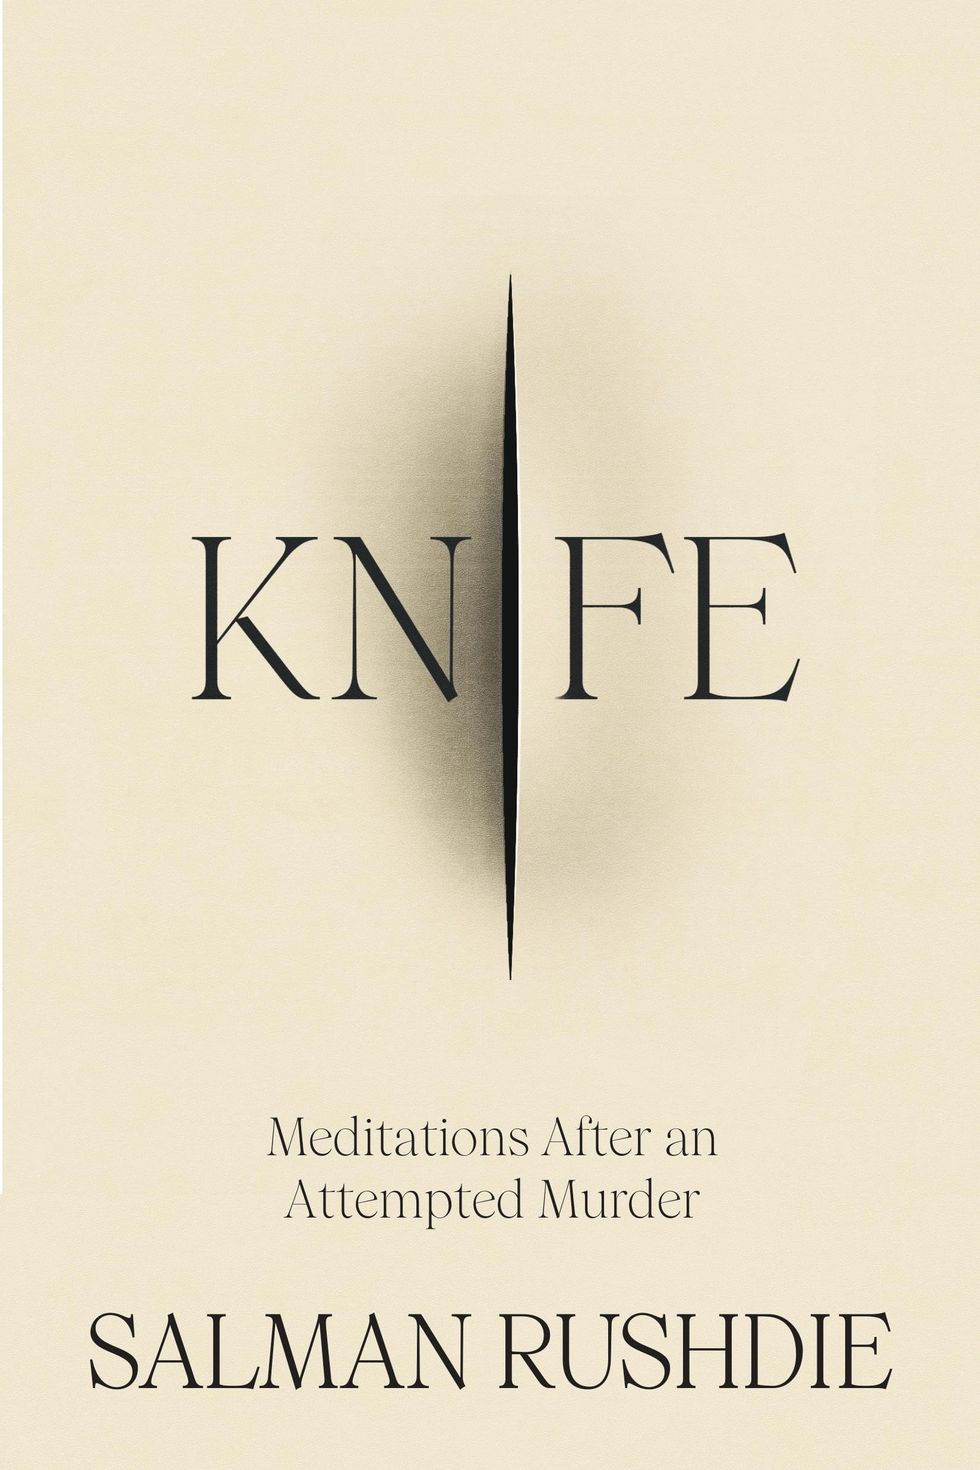 Knife: Meditations After an Attempted Murder, Salman Rushdie (16 April)